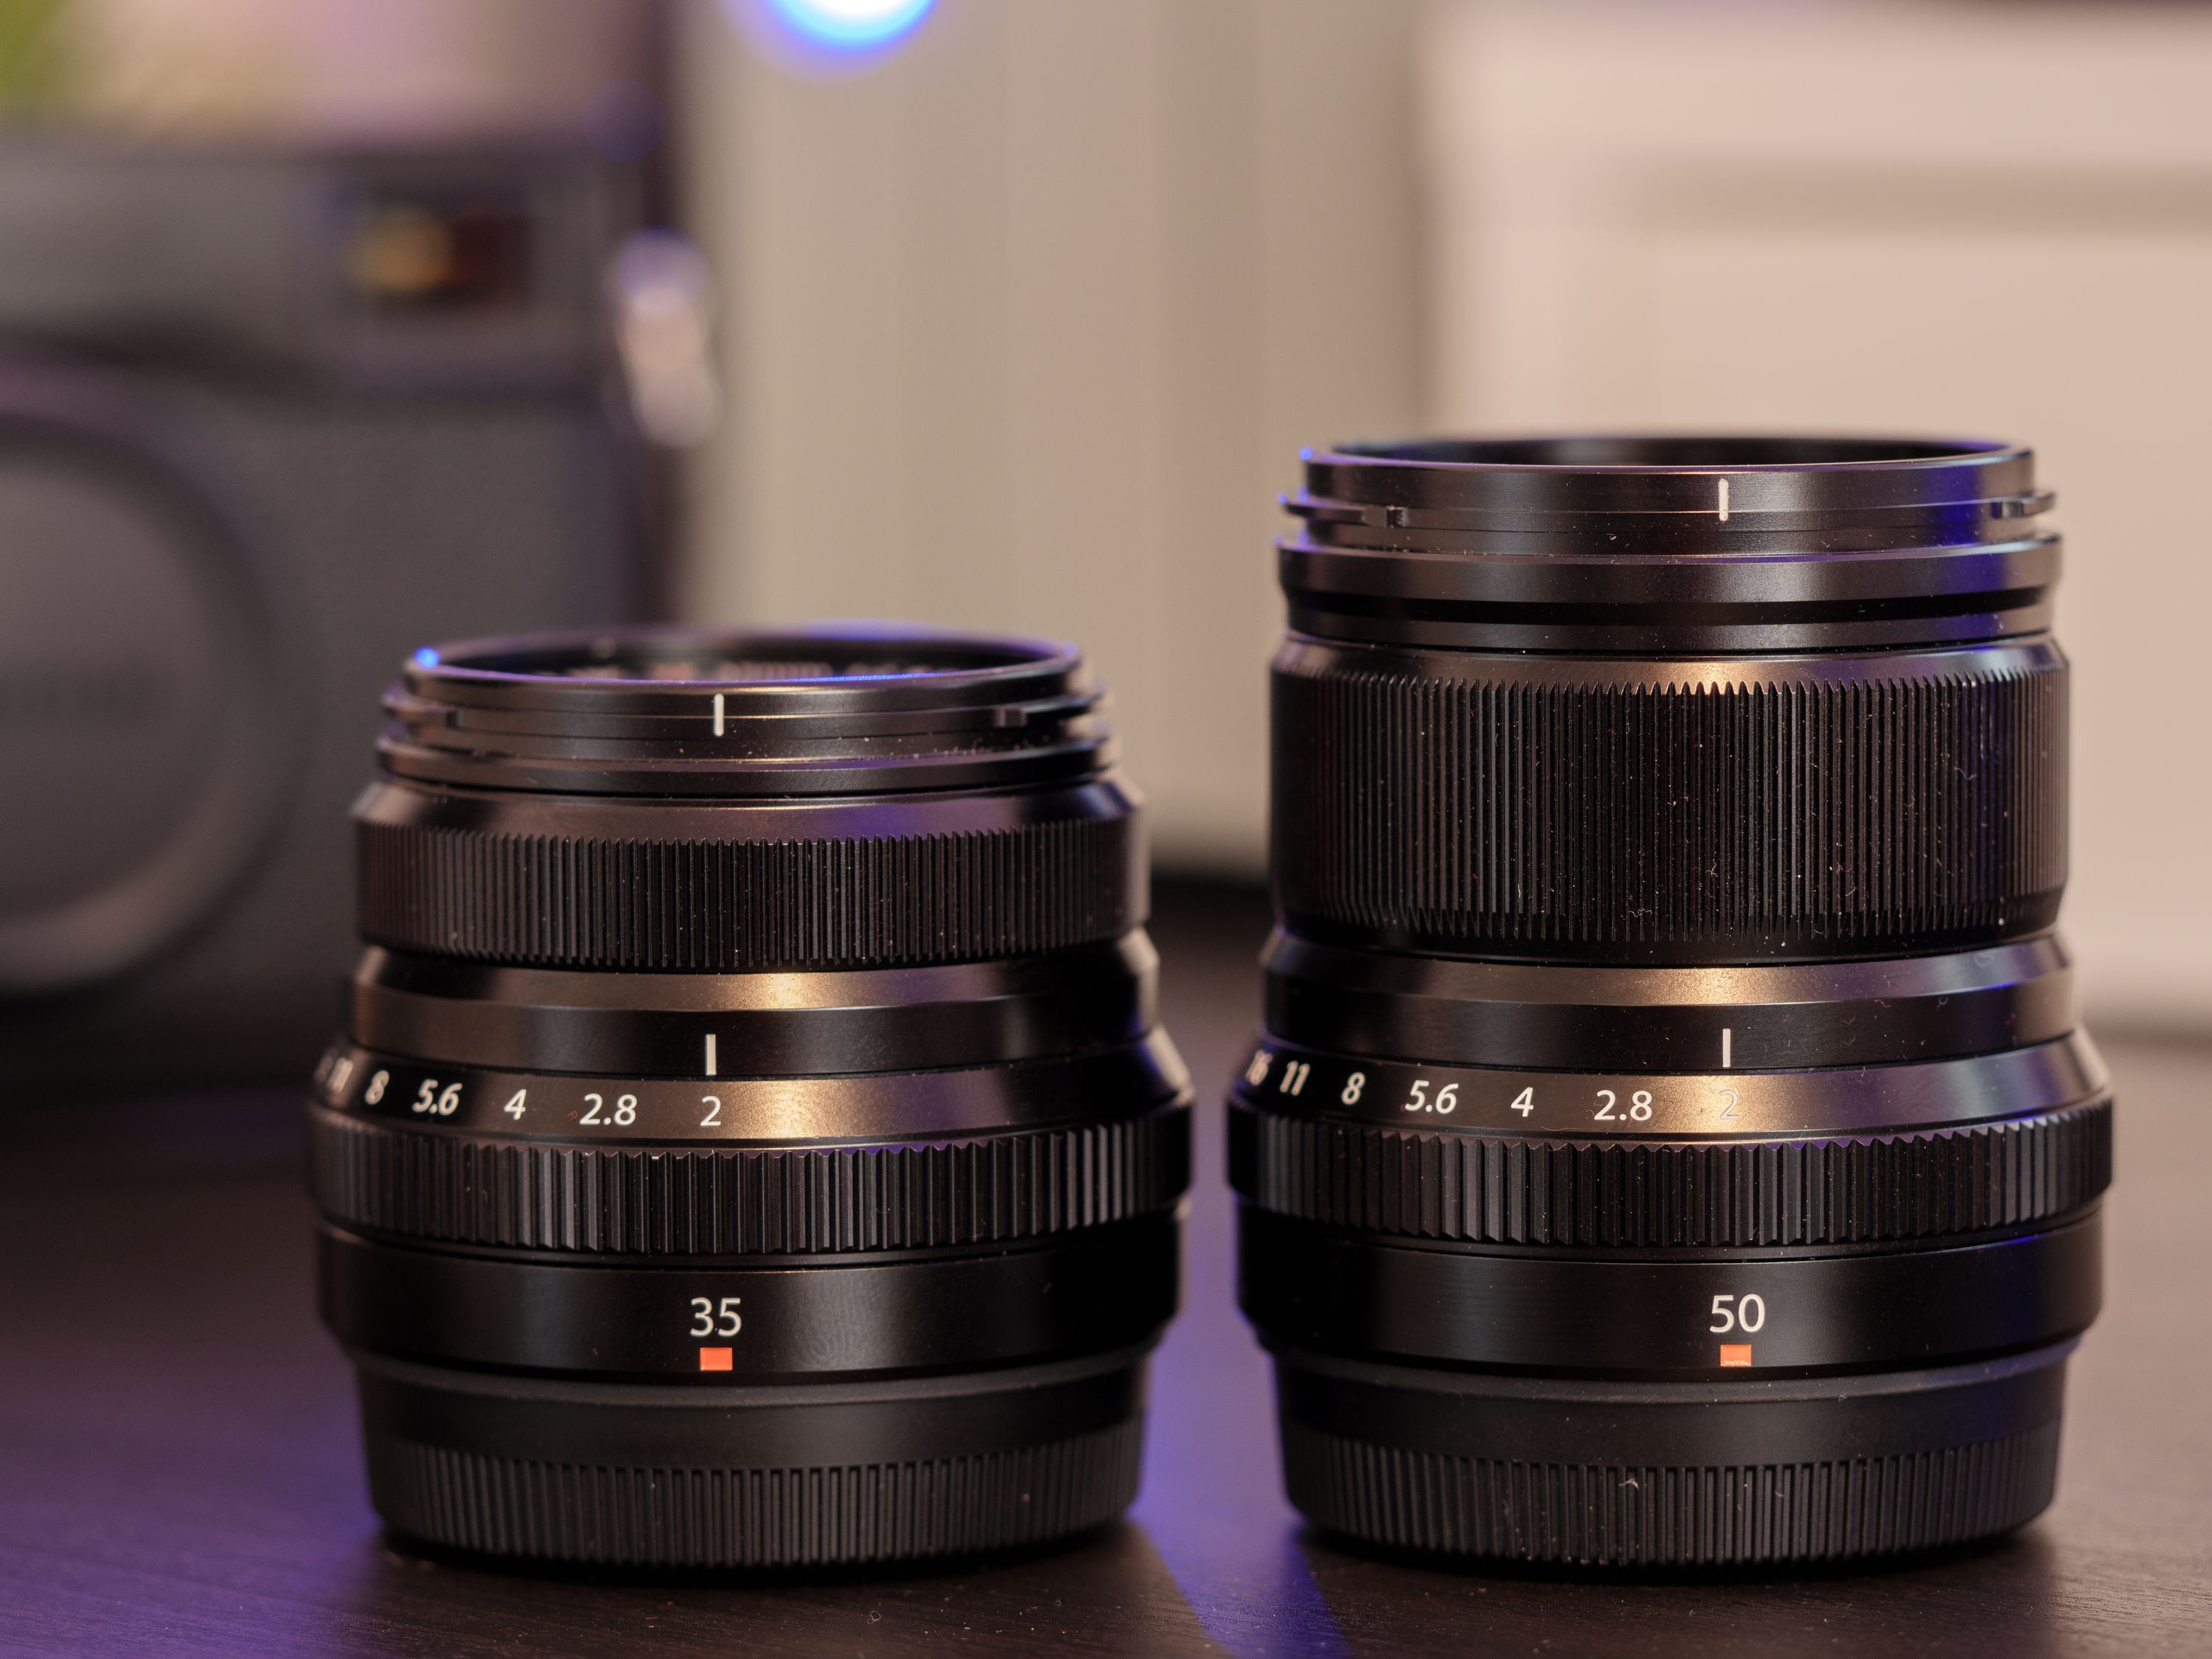 The XF 35mm and 50mm ƒ/2 pair, shown without their hoods.